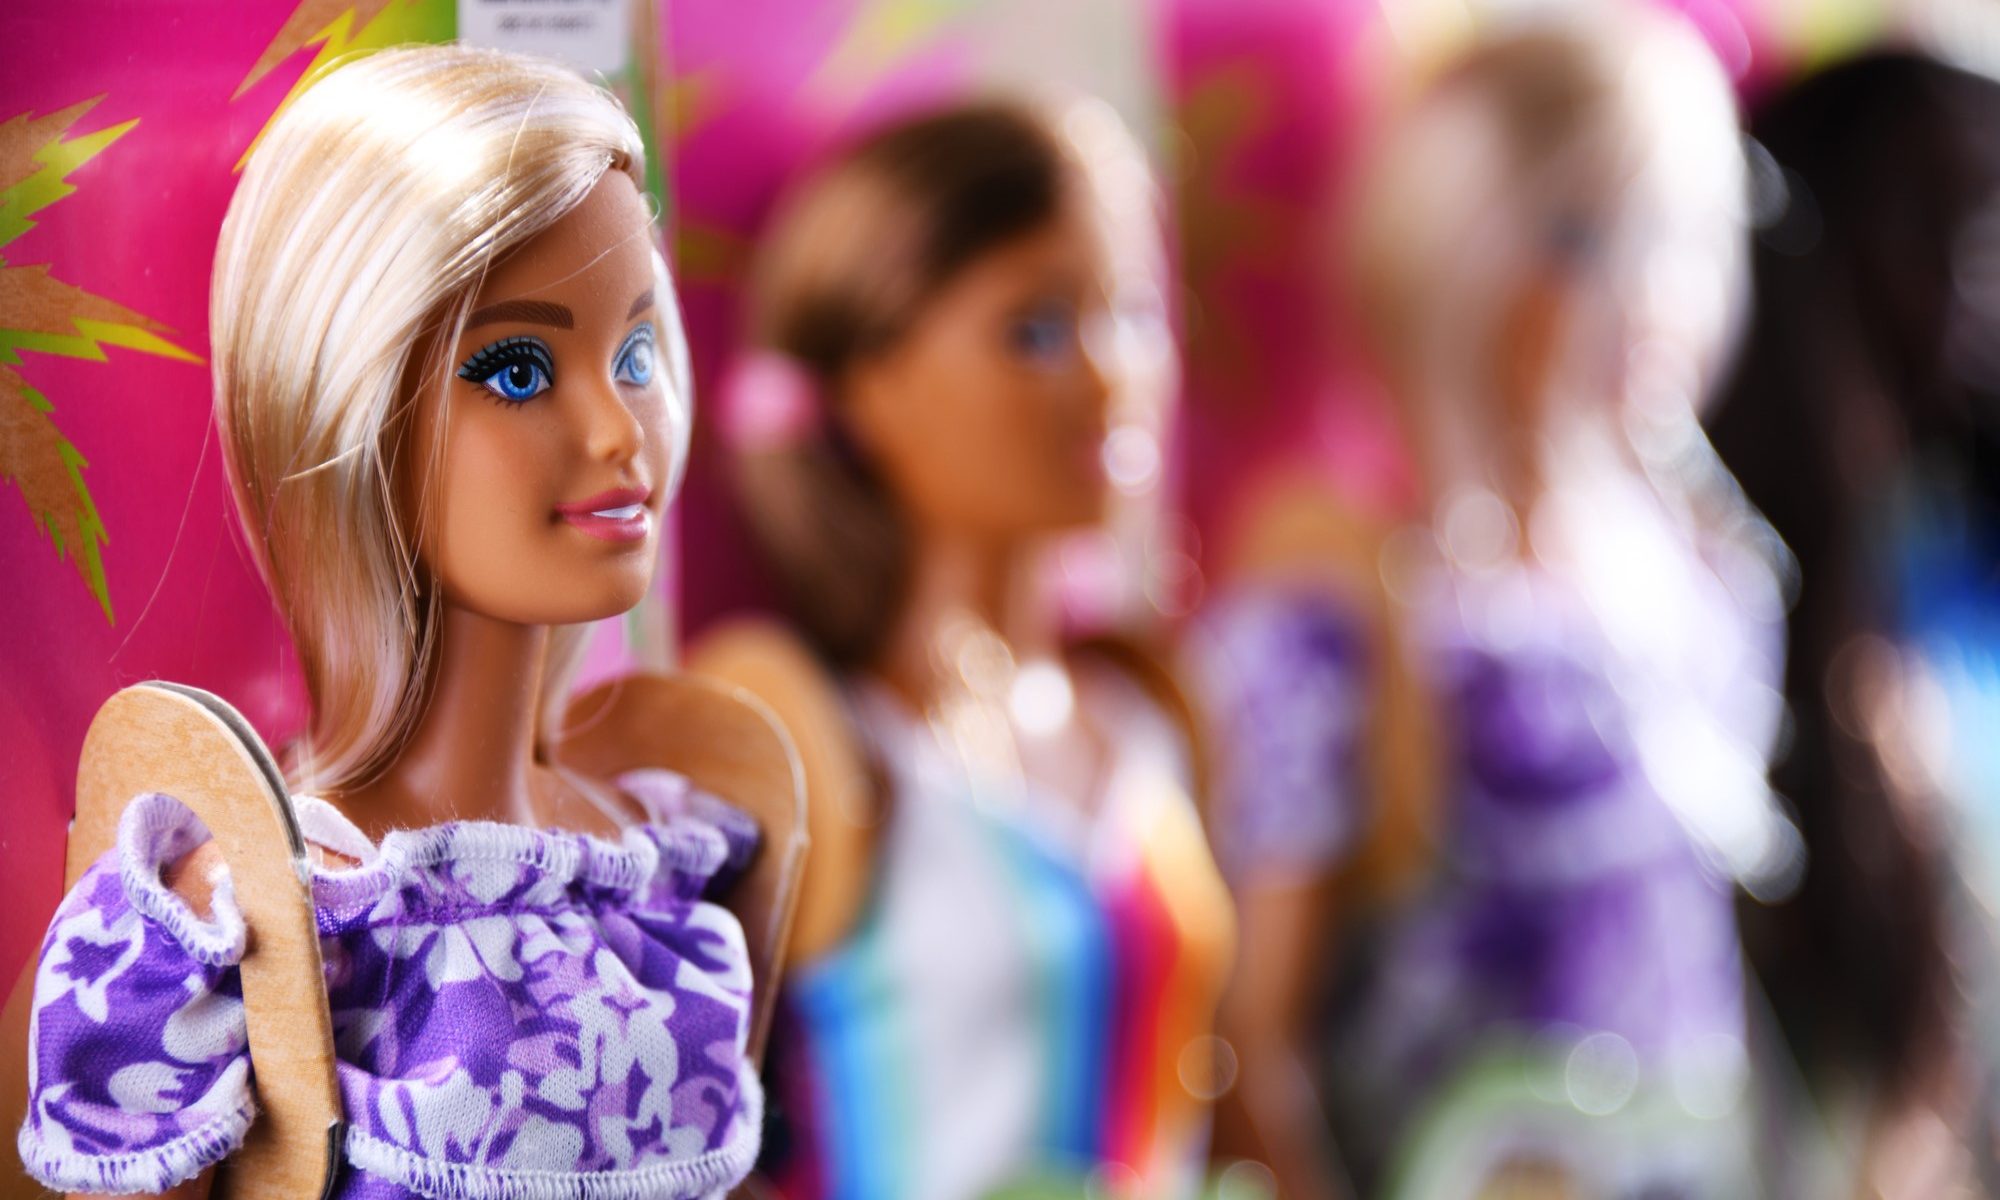 photograph of Barbie dolls in packaging on shelf